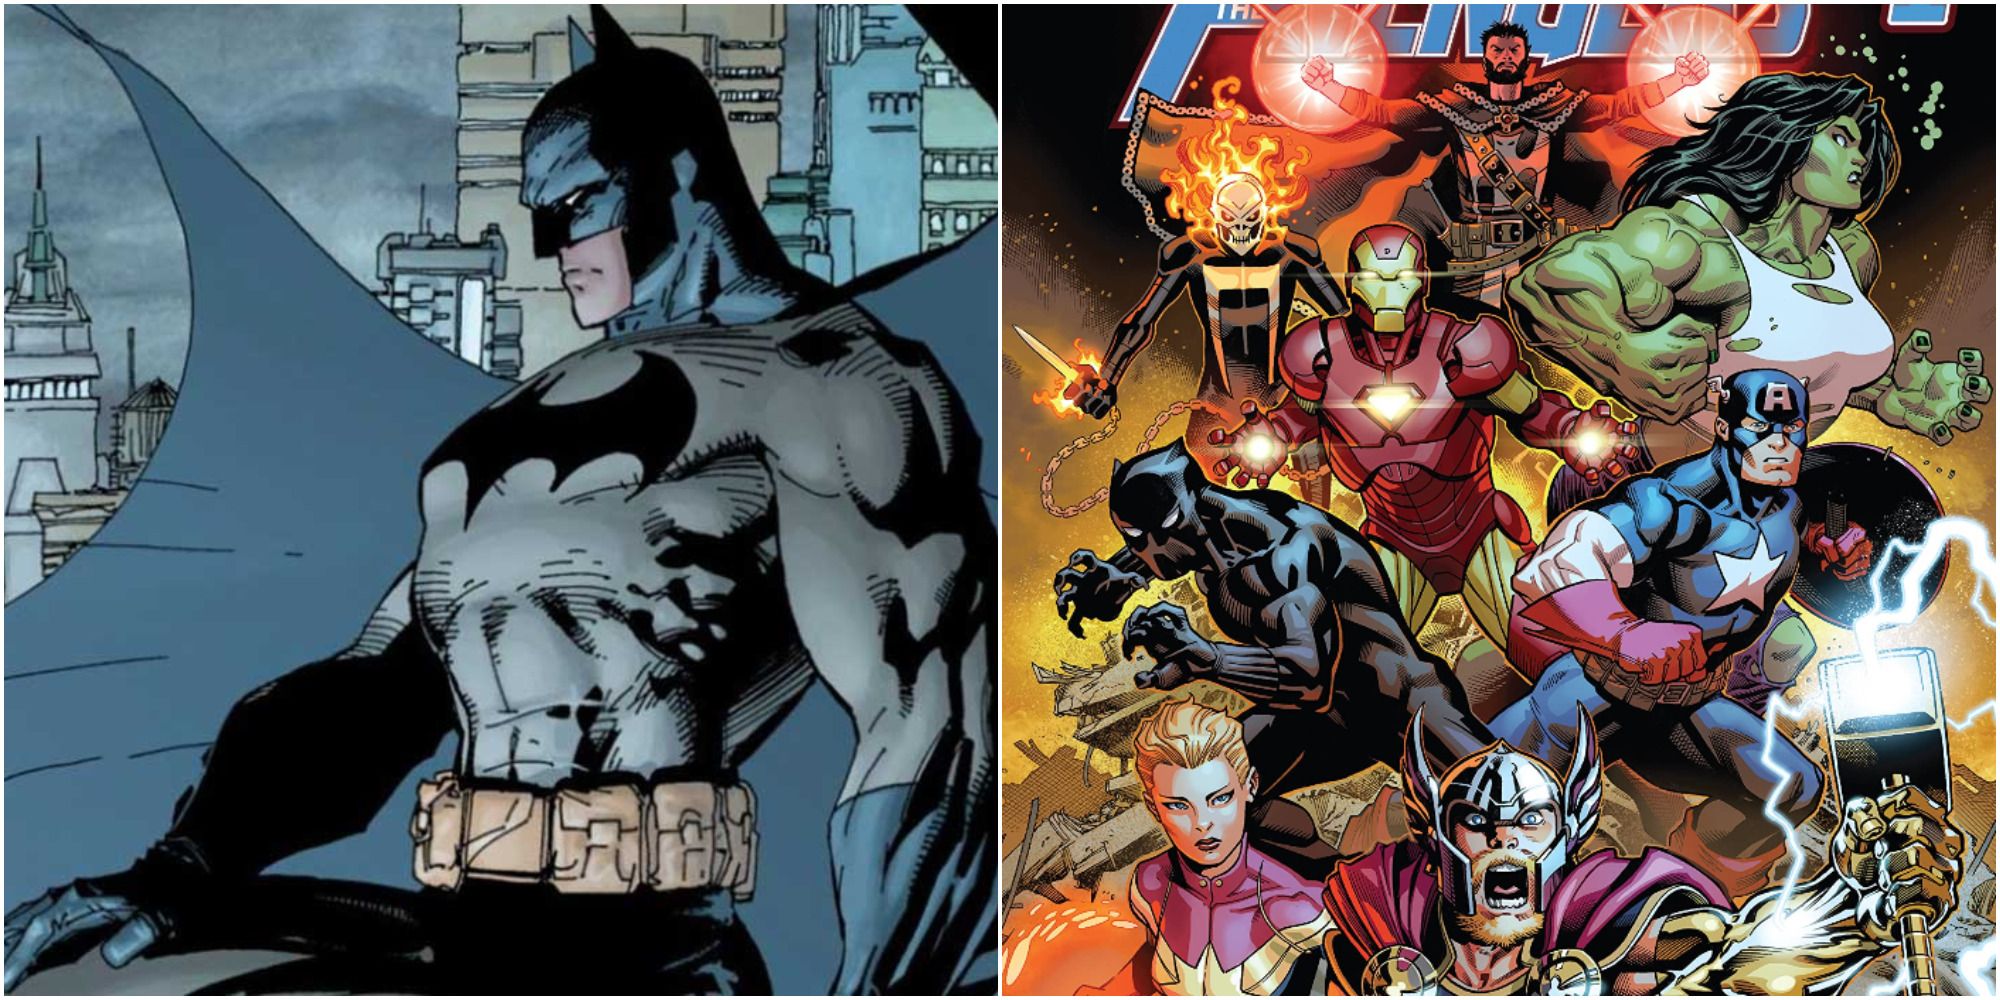 Batman: 5 Reasons He Could Beat The Avengers Solo (& 5 He Can't)